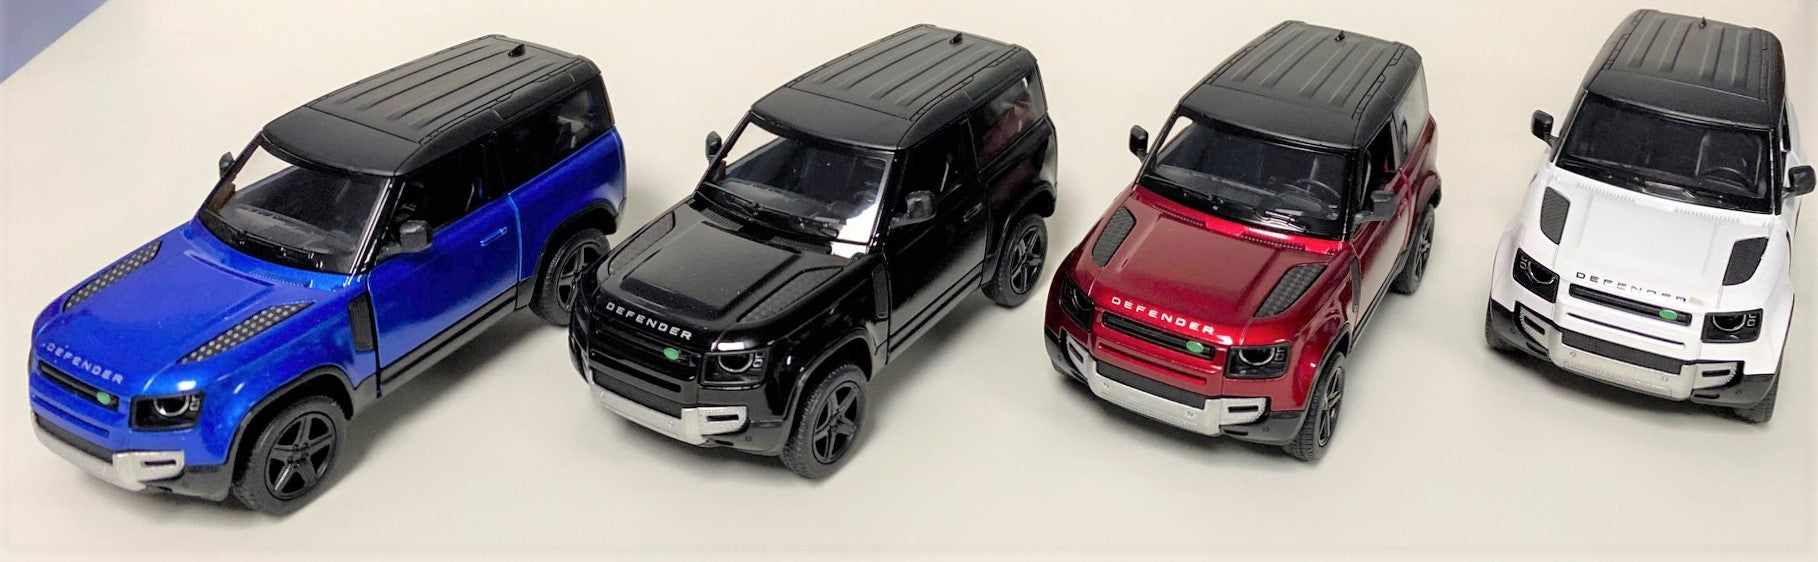 Landrover Defender 90 (Assorted) - Toybox Tales